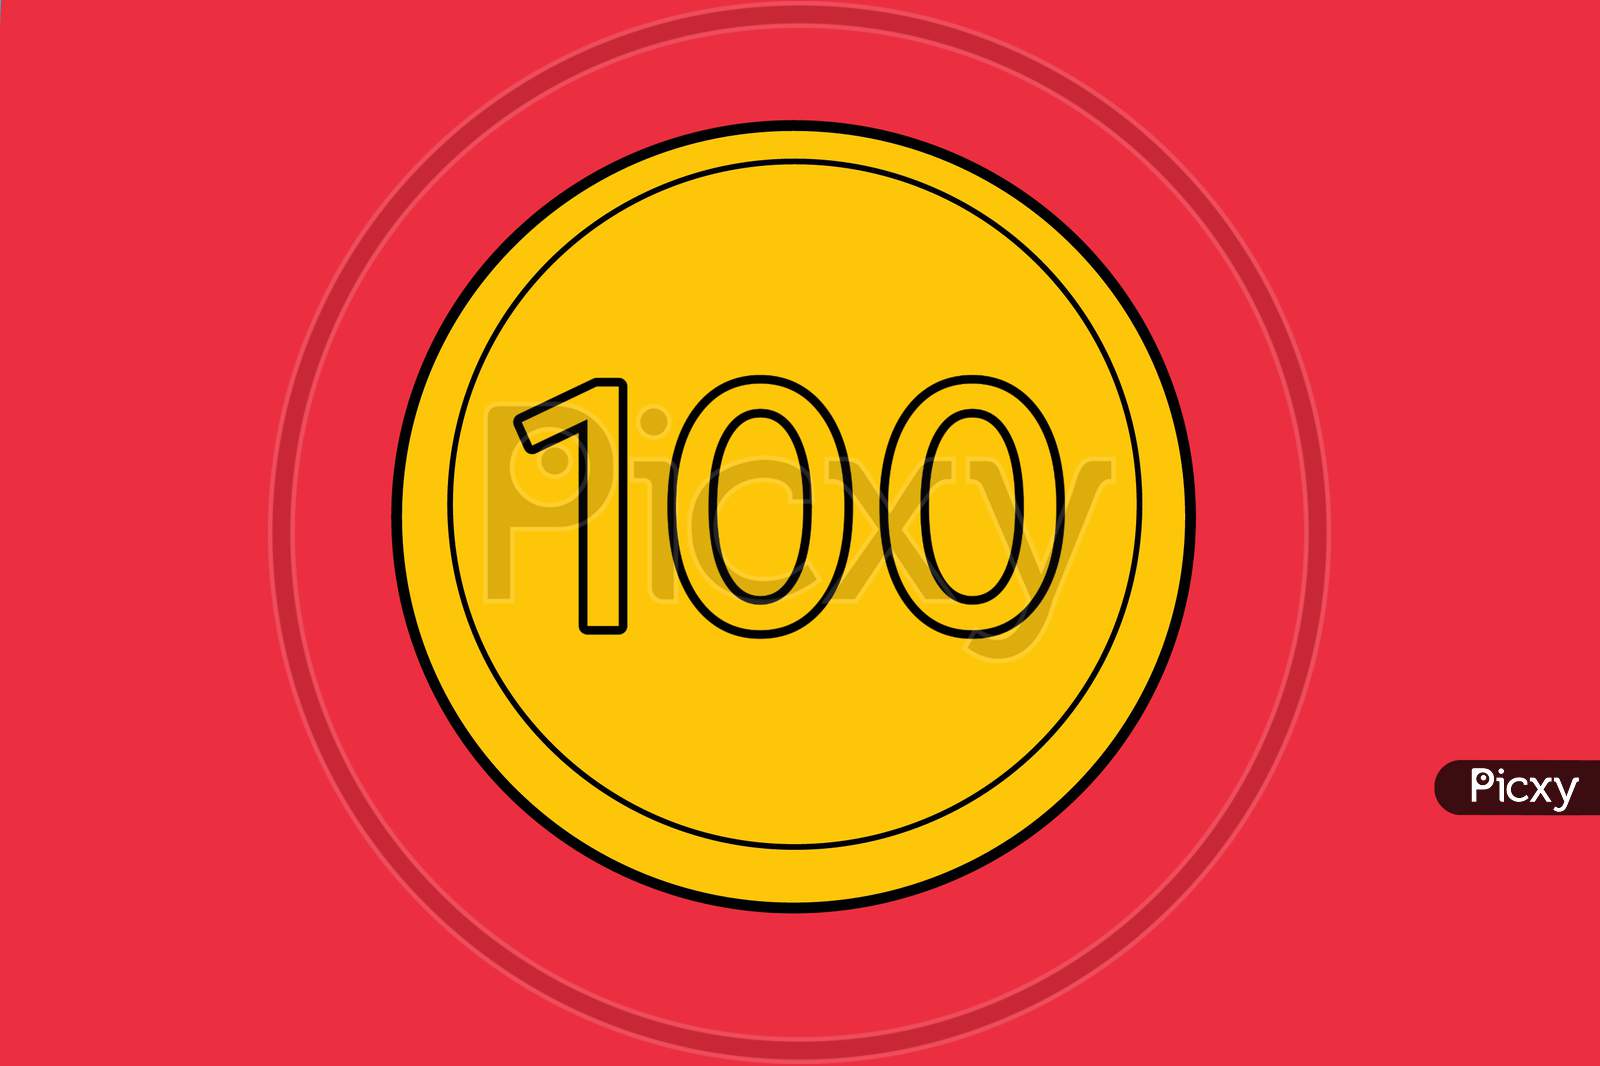 Hundred money yellow coin